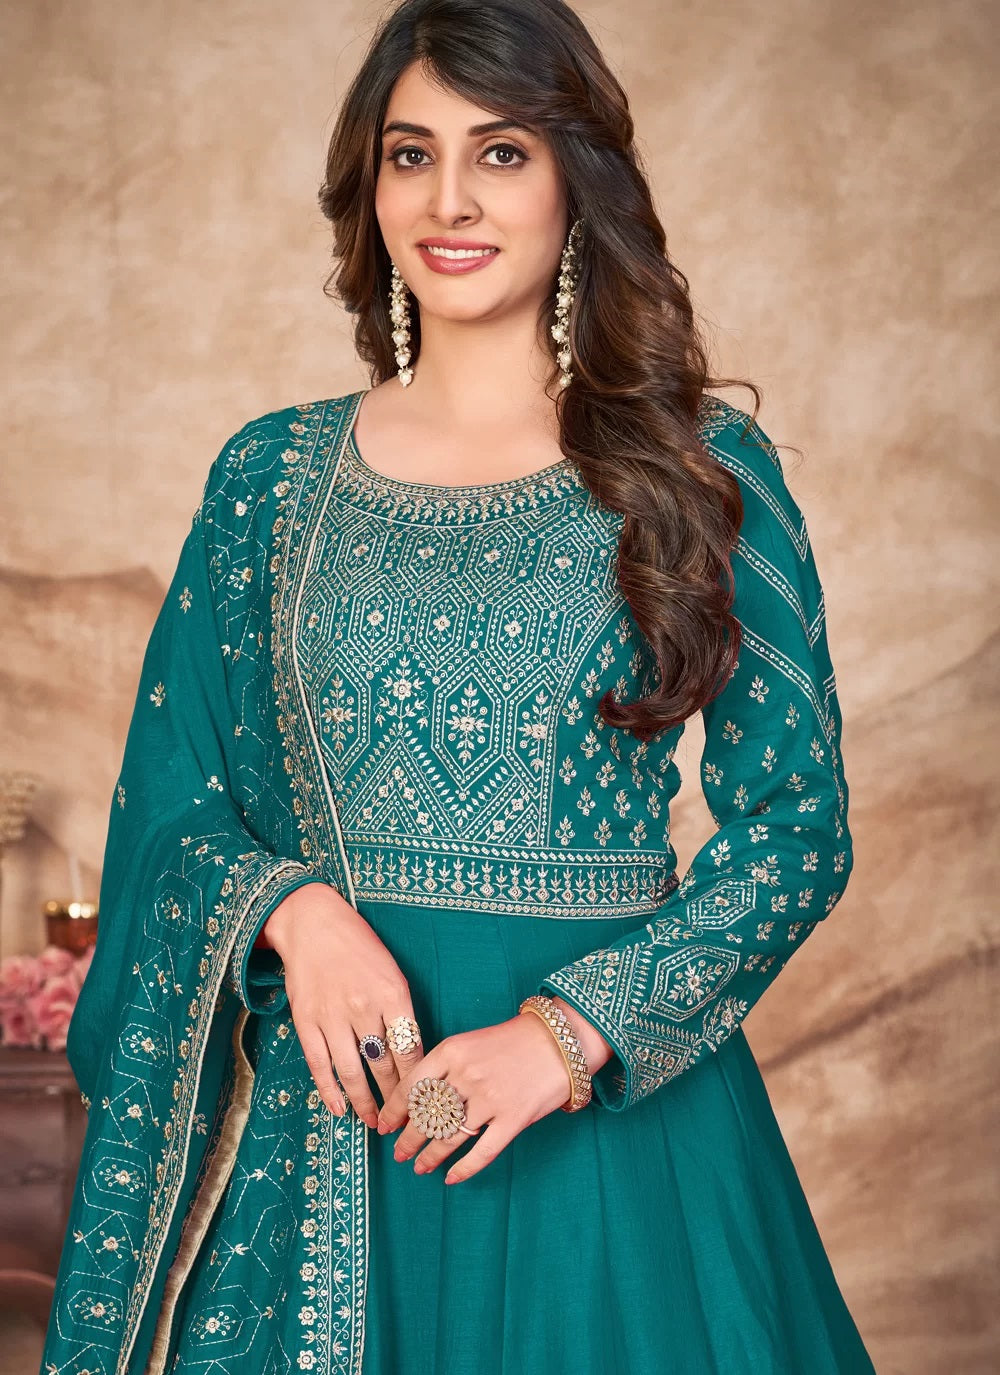 Teal Blue Embroidered Art Silk Abaya Style Suit